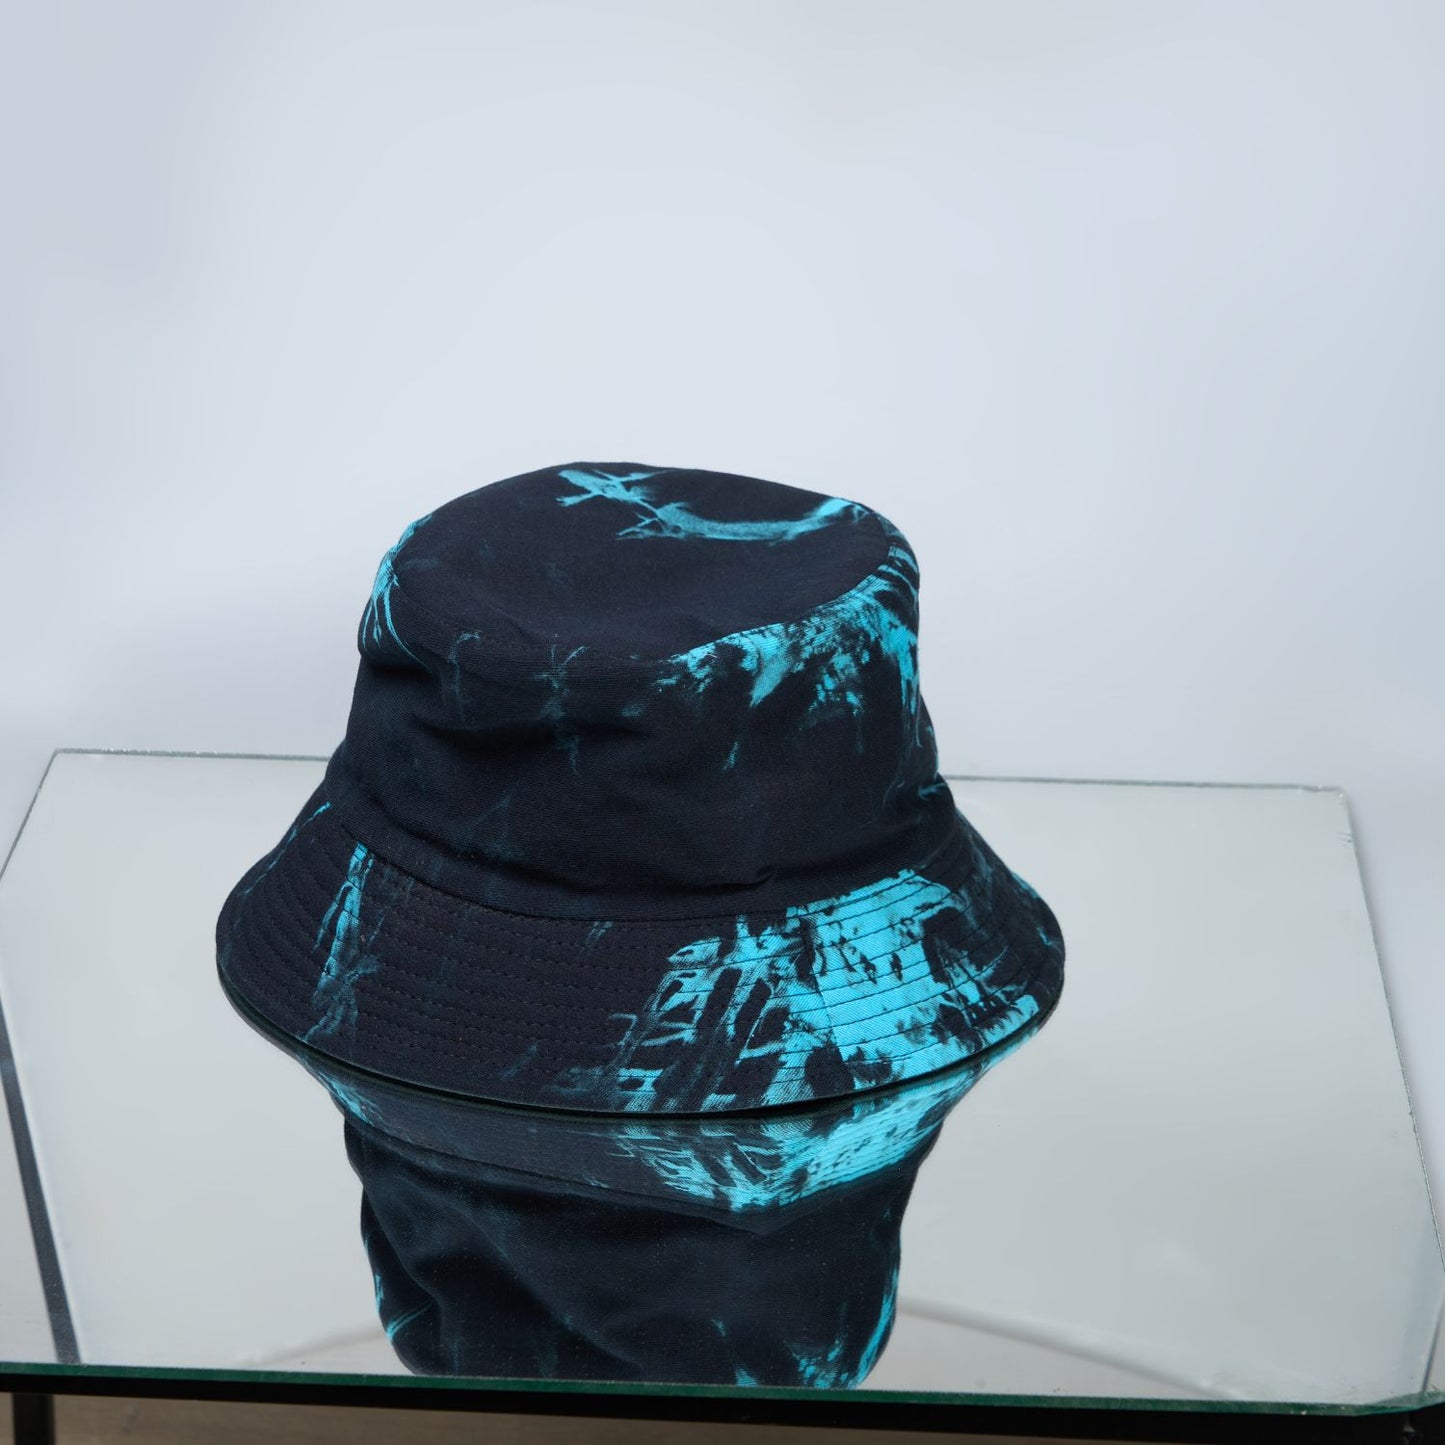 Blue and green colored, lightweight bucket hat for men design detail.